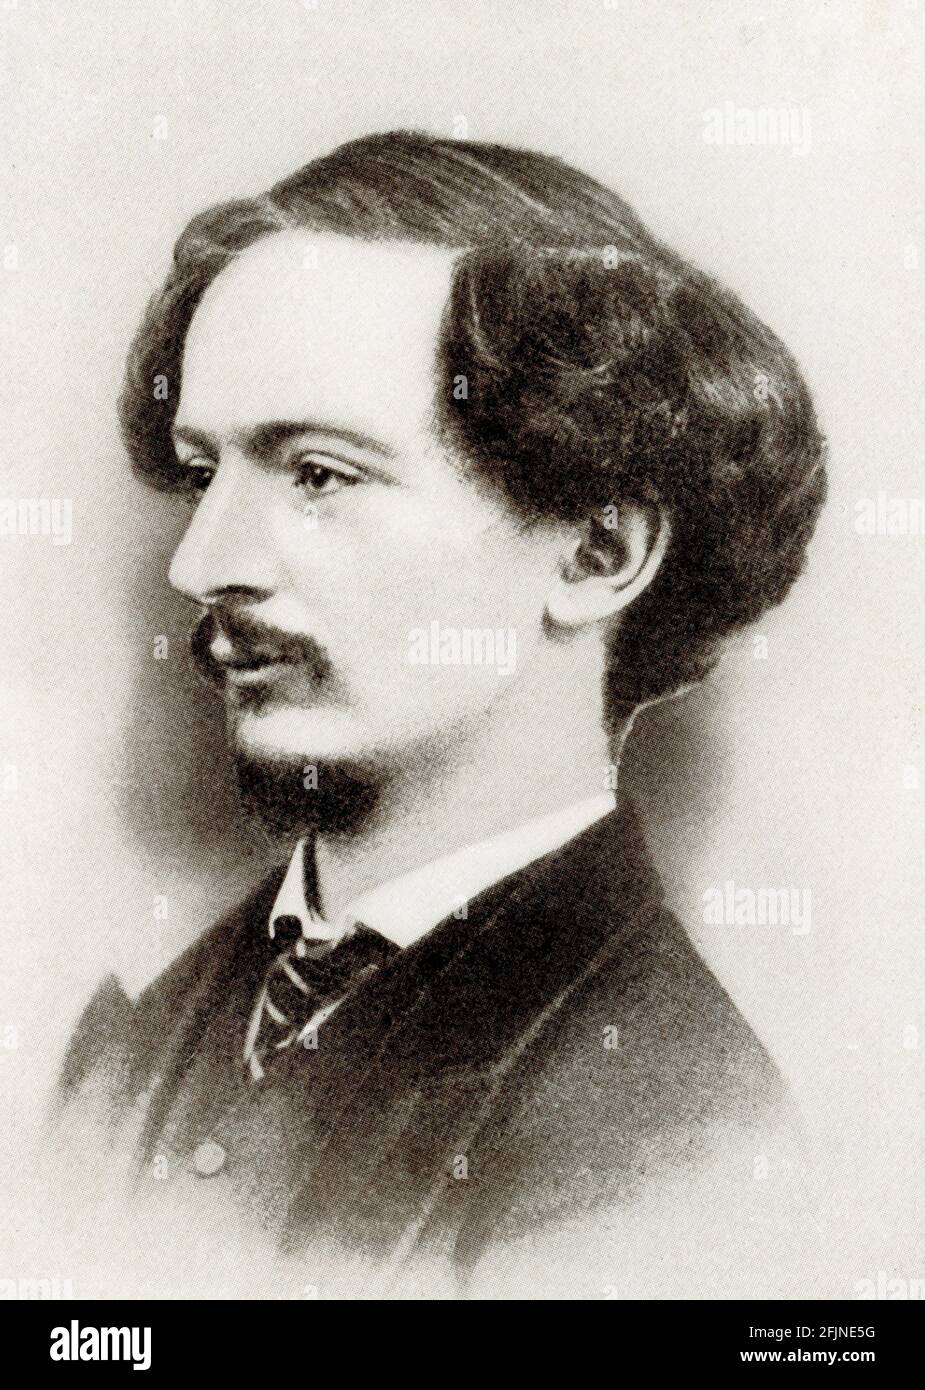 Algernon Charles Swinburne (1837 –1909) was an English poet, playwright, novelist, and critic. He wrote several novels and collections of poetry such as Poems and Ballads, and contributed to the famous Eleventh Edition of the Encyclopaedia Britannica. Stock Photo